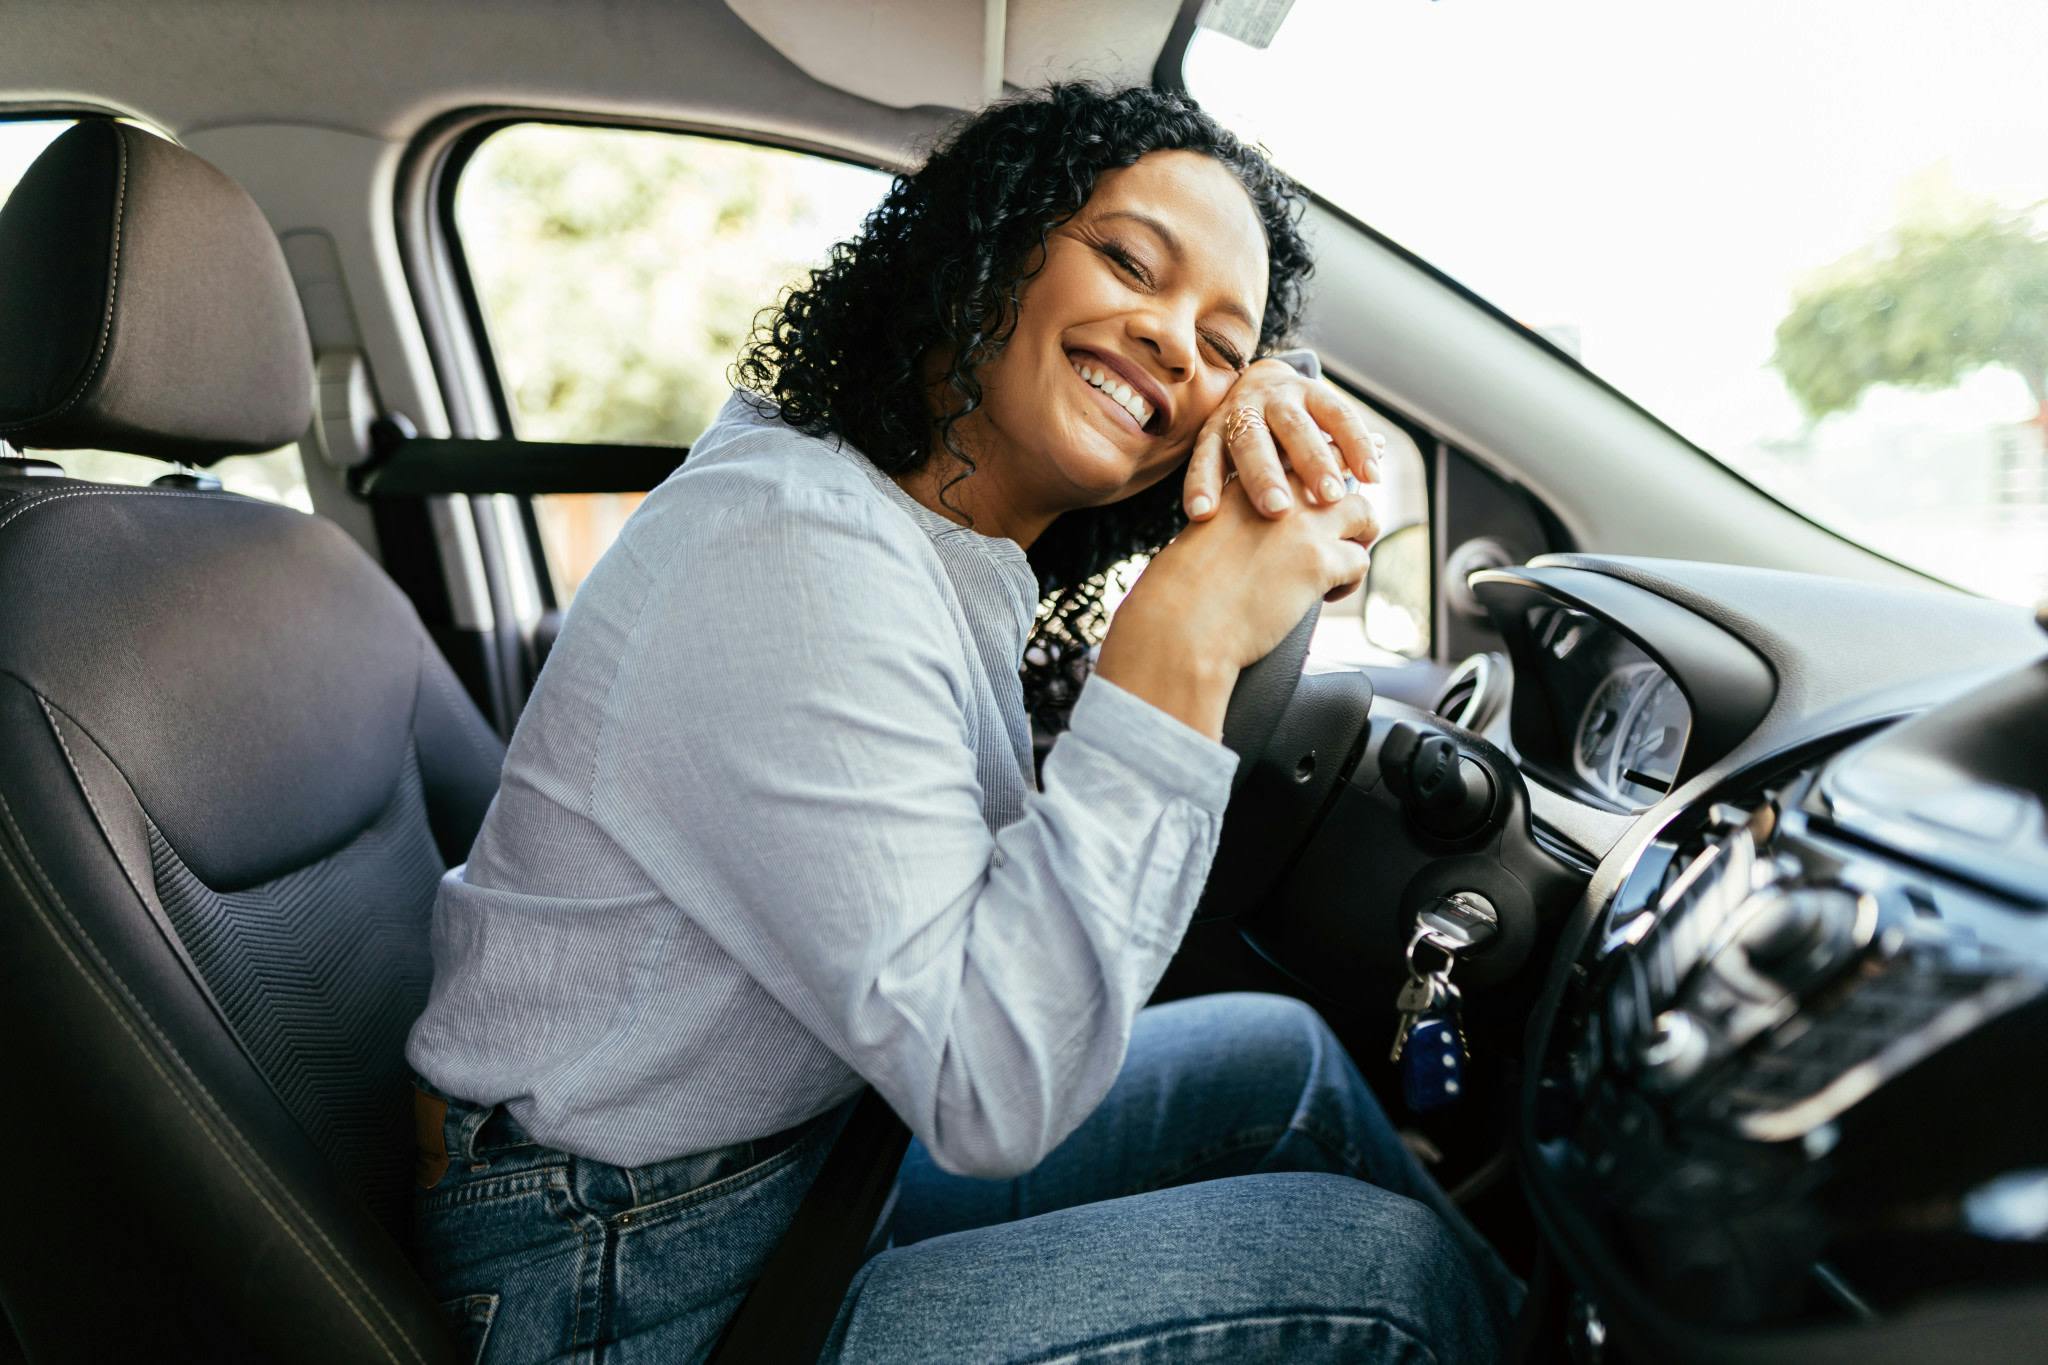 Woman sitting in car lying against the wheel happily.